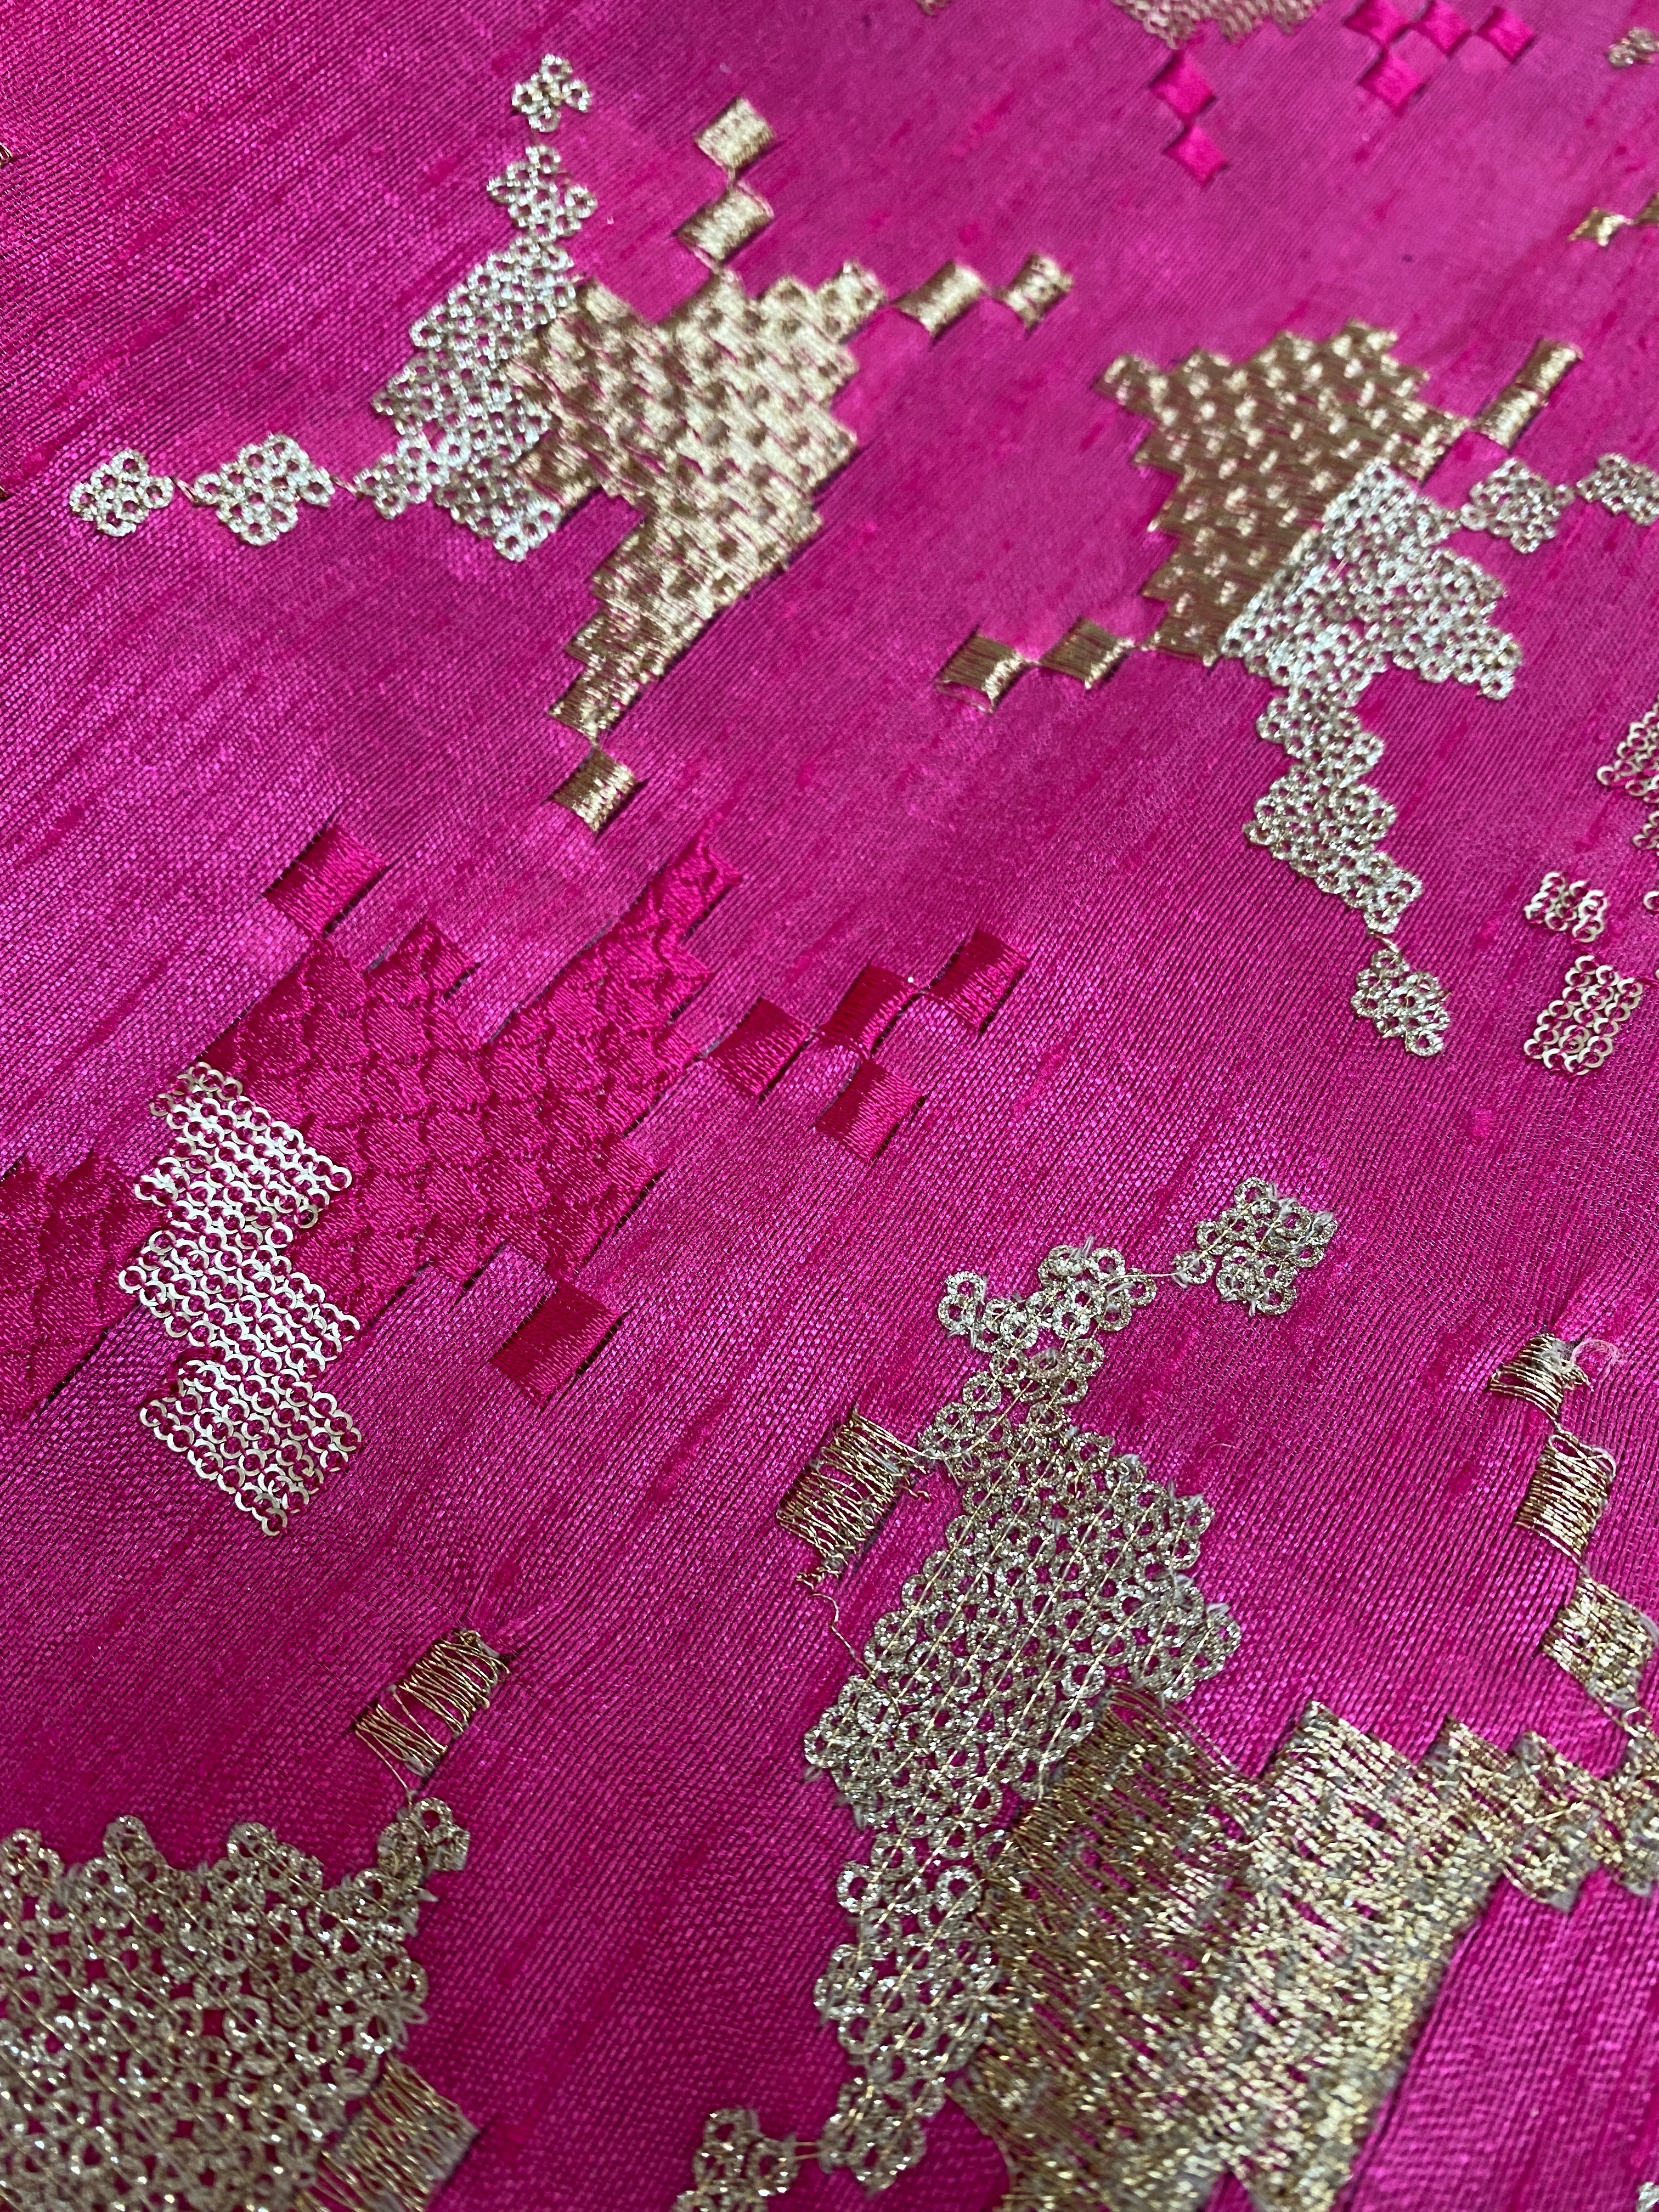 Lego - Pink & Gold Embroidery